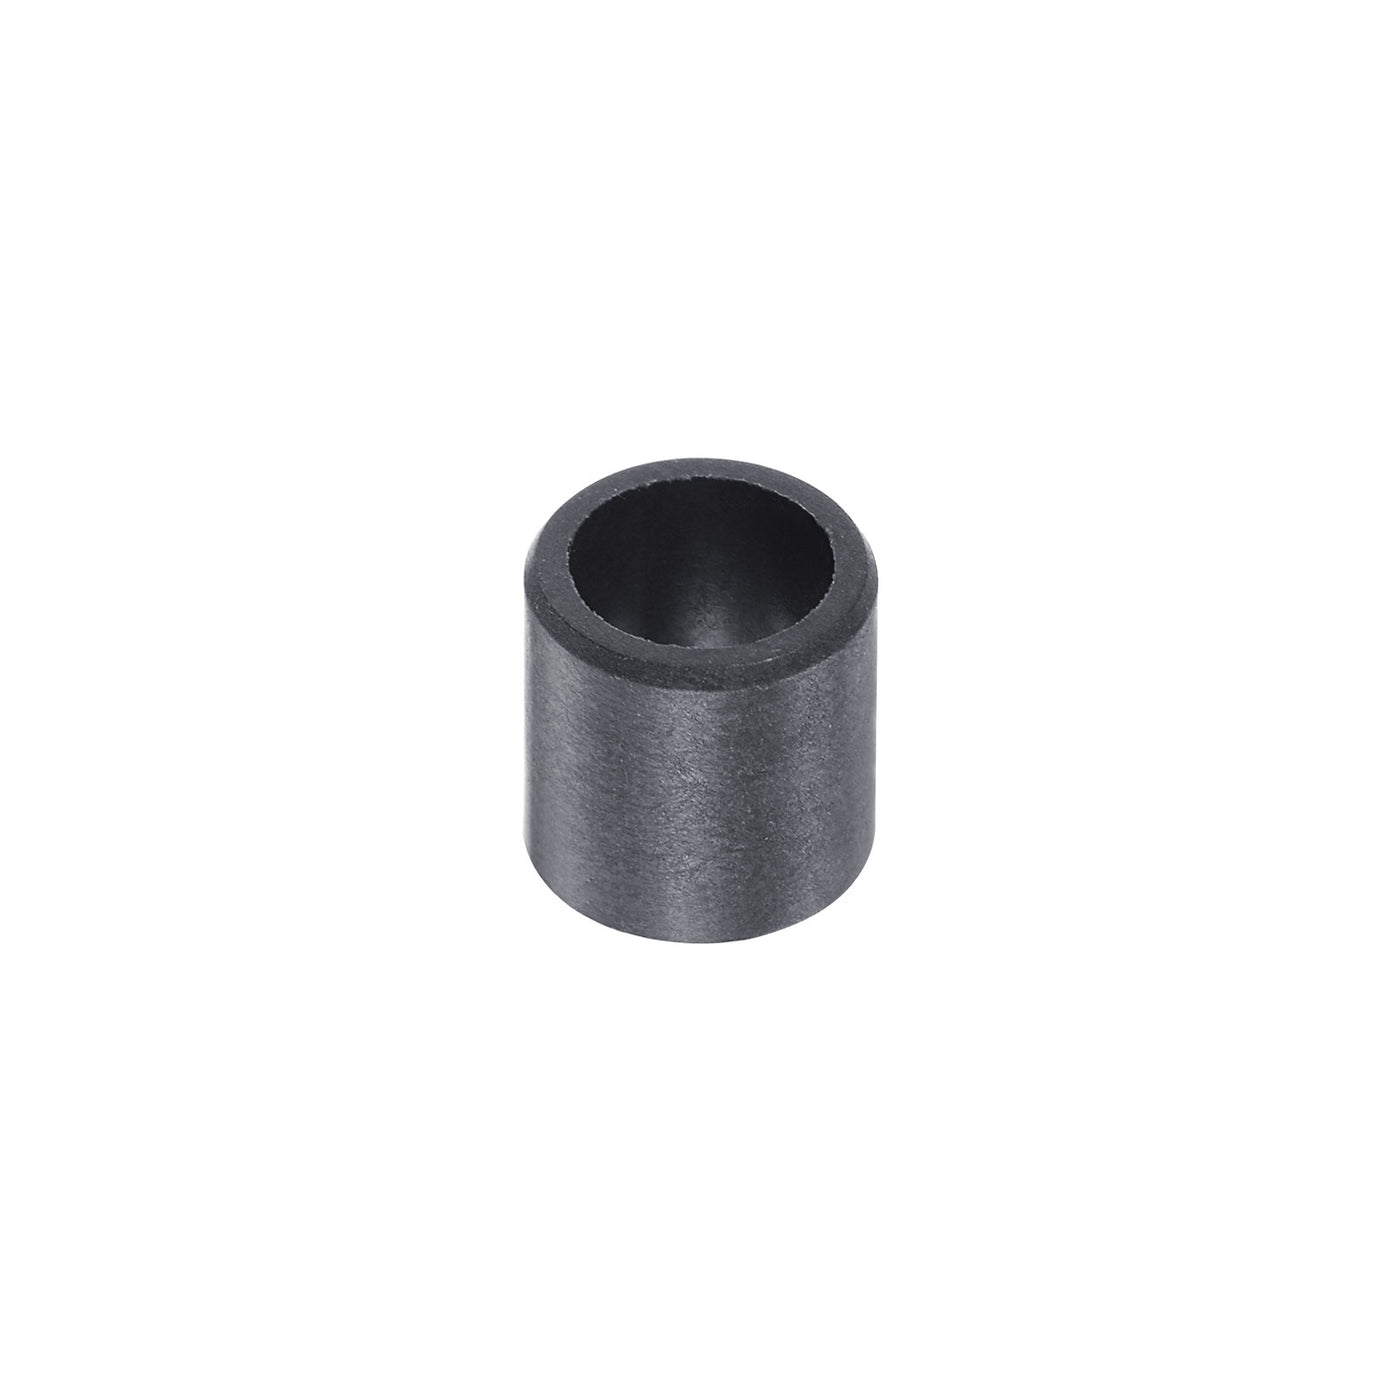 uxcell Uxcell Sleeve Bearings 6mmx8mmx8mm POM Wrapped Oilless Bushings Black